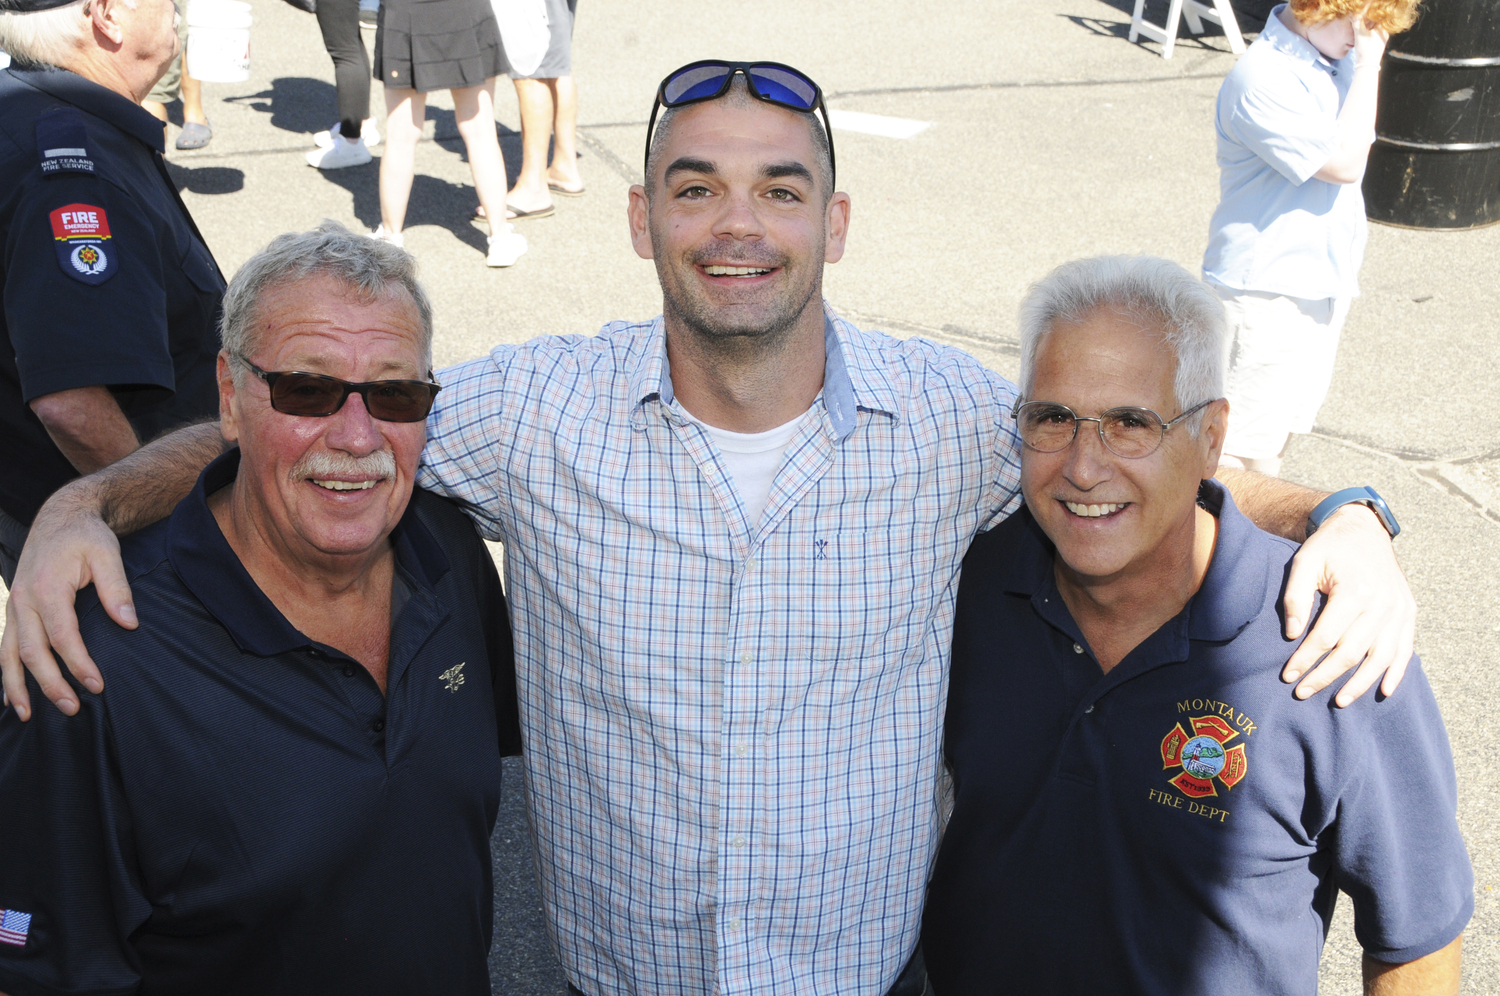 Eddie Ecker, East Hampton Town Police Sergeant Kenneth Alversa, and Montauk Fire Department former Chief Tom Grenci at the 40th annual  Montauk Fire Department Big Bucks Bonanza on Sunday at the firehouse. Music was provided by the local Nancy Atlas Project and special guest musician Joe Delia. Proceeds from the Bonanza go to a Scholarship Fund for Montauk youths. Each scholarship is in memory of a Montauk fireman who worked at Montauk School:  Custodian Don Truesdale; Athletic Director Hank Zebrowski; Crossing Guard Skip Cannon; and Superintendent  Bob Fisher. To date, the Big Bucks Bonanza prize drawing has given away Scholarship prize money totaling almost $5,000,000.   RICHARD LEWIN